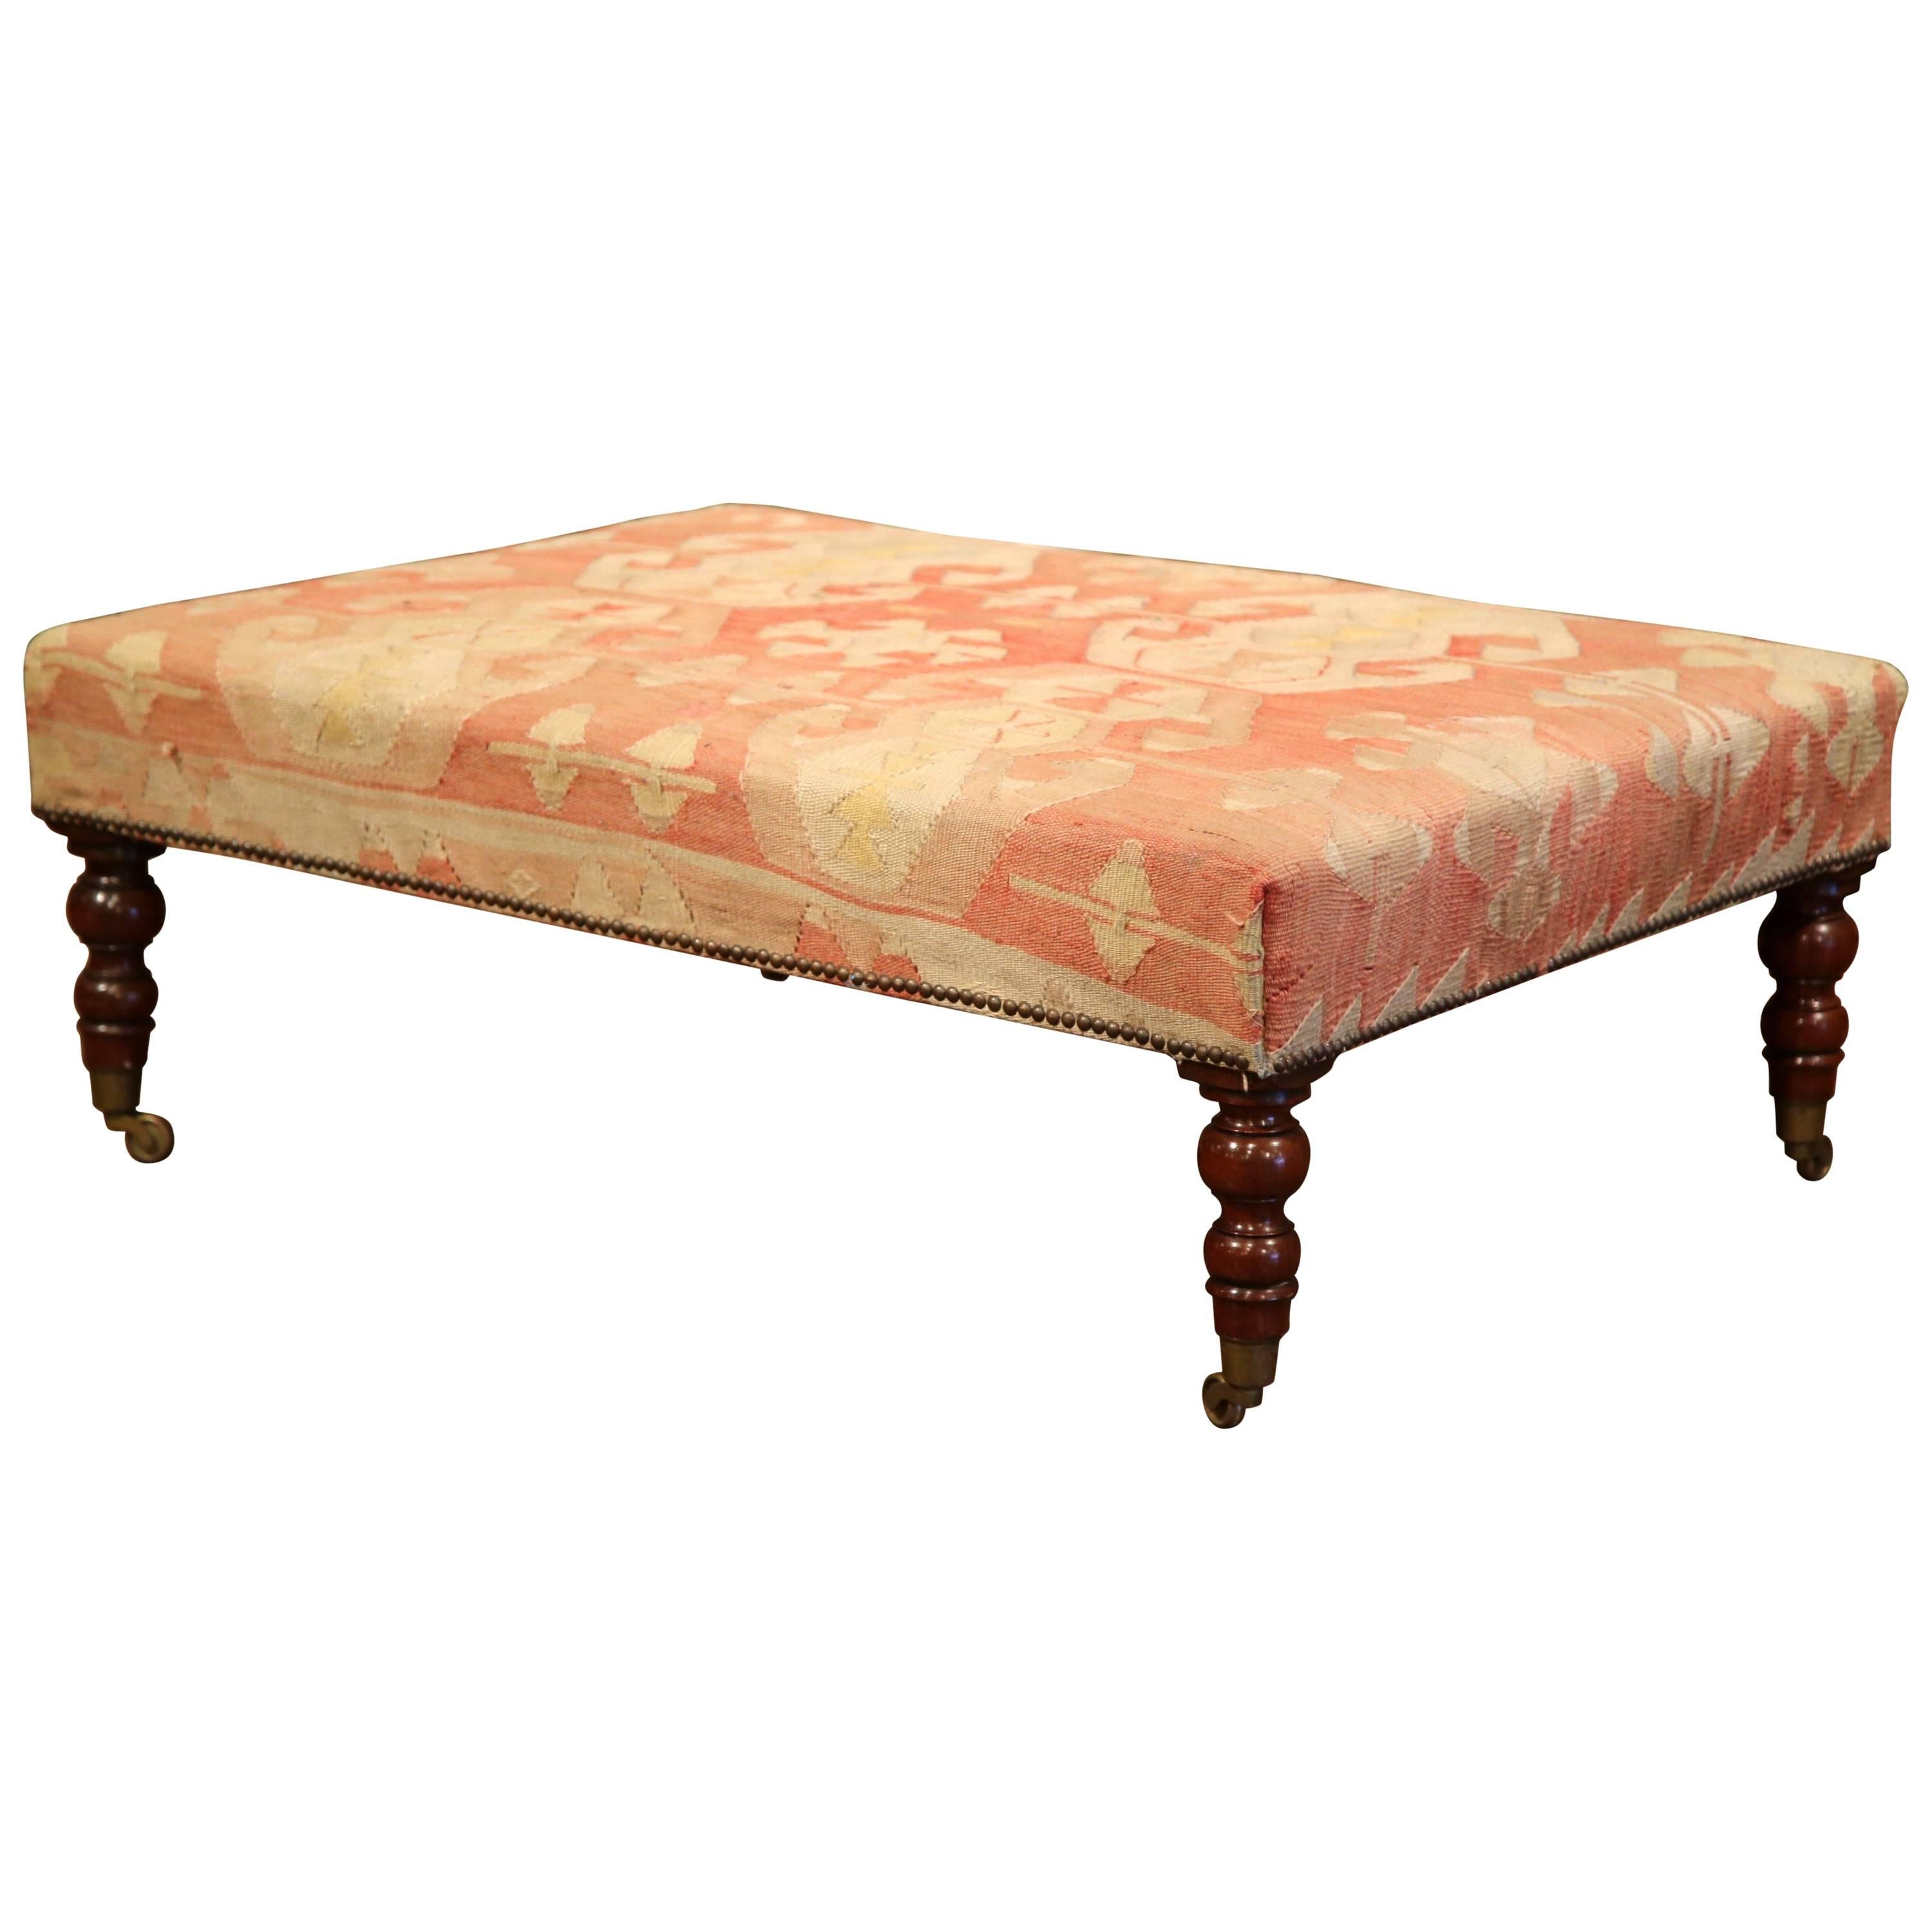 Large 19th Century, French, Louis Philippe Walnut Ottoman with Kilim Tapestry